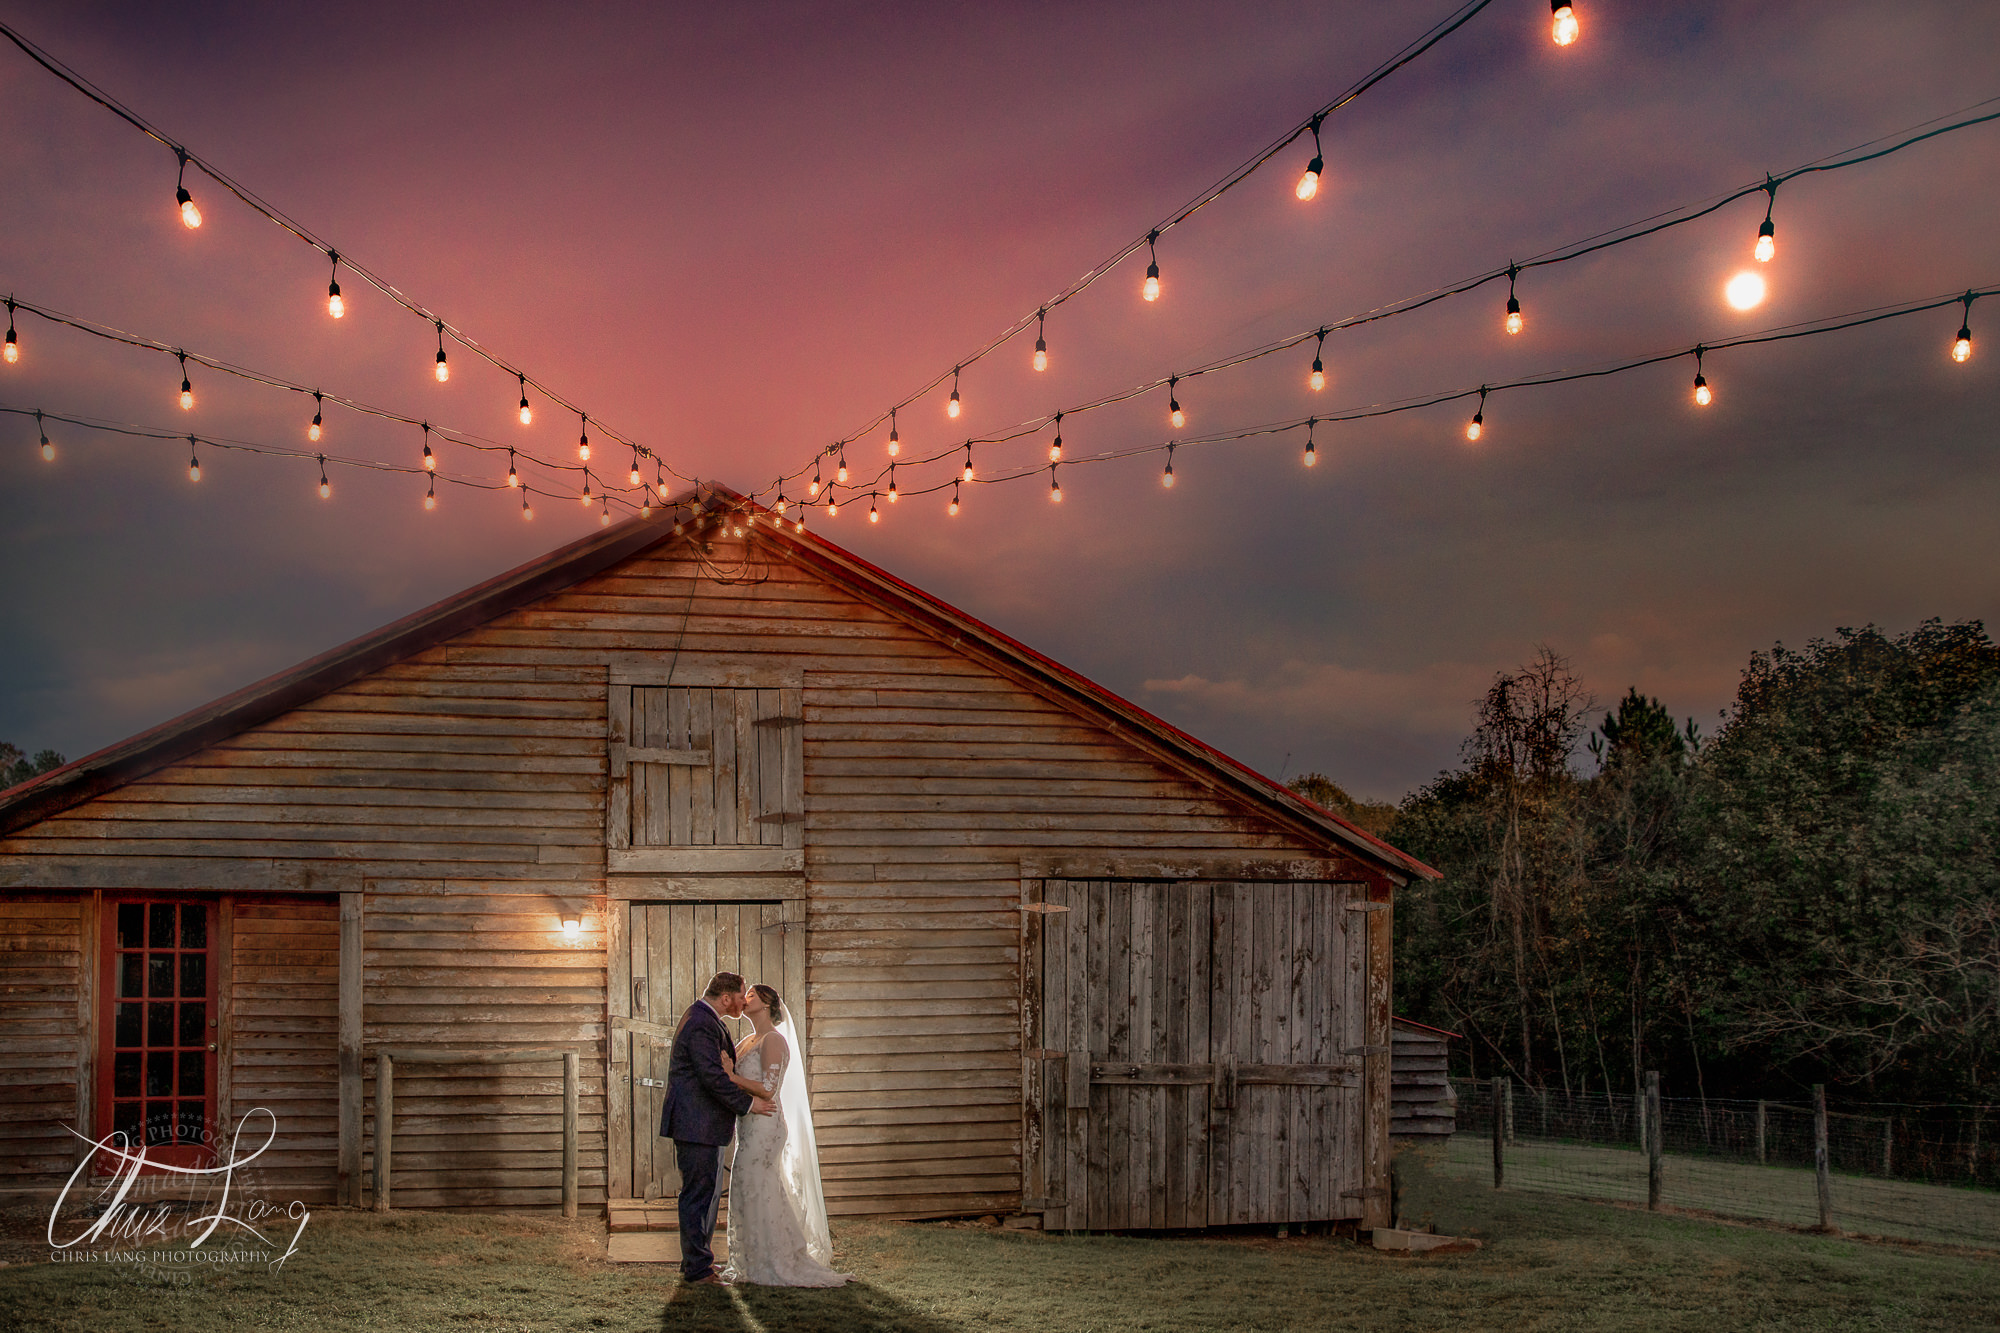 A creative wedding picture of a groom holding a lantern whilt kiissing his bride in her wedding dress. Wilmingotn NC Photographer